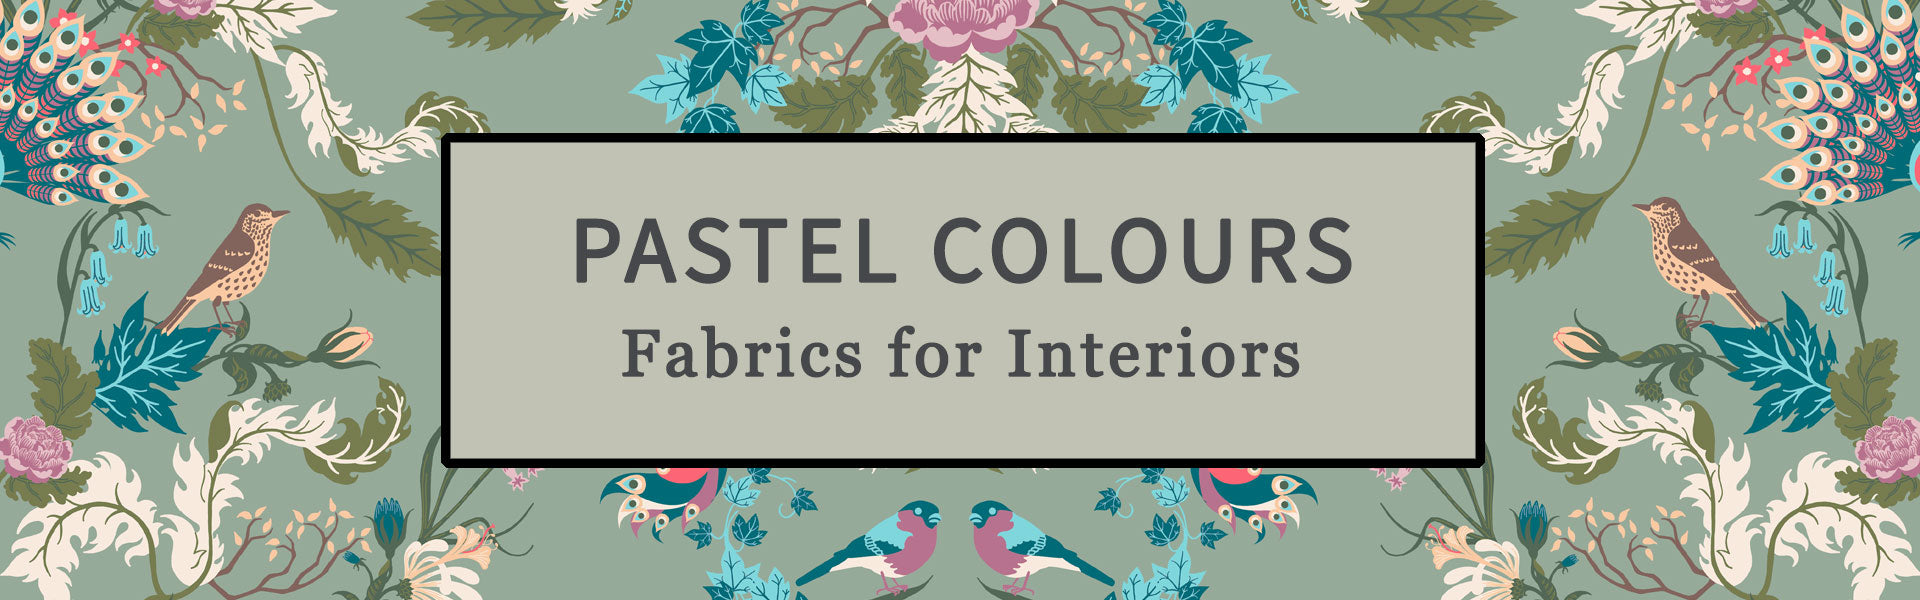 Pastel Fabric for Interiors, Upholstery, Curtains & Soft Furnishings by Designer, Becca Who